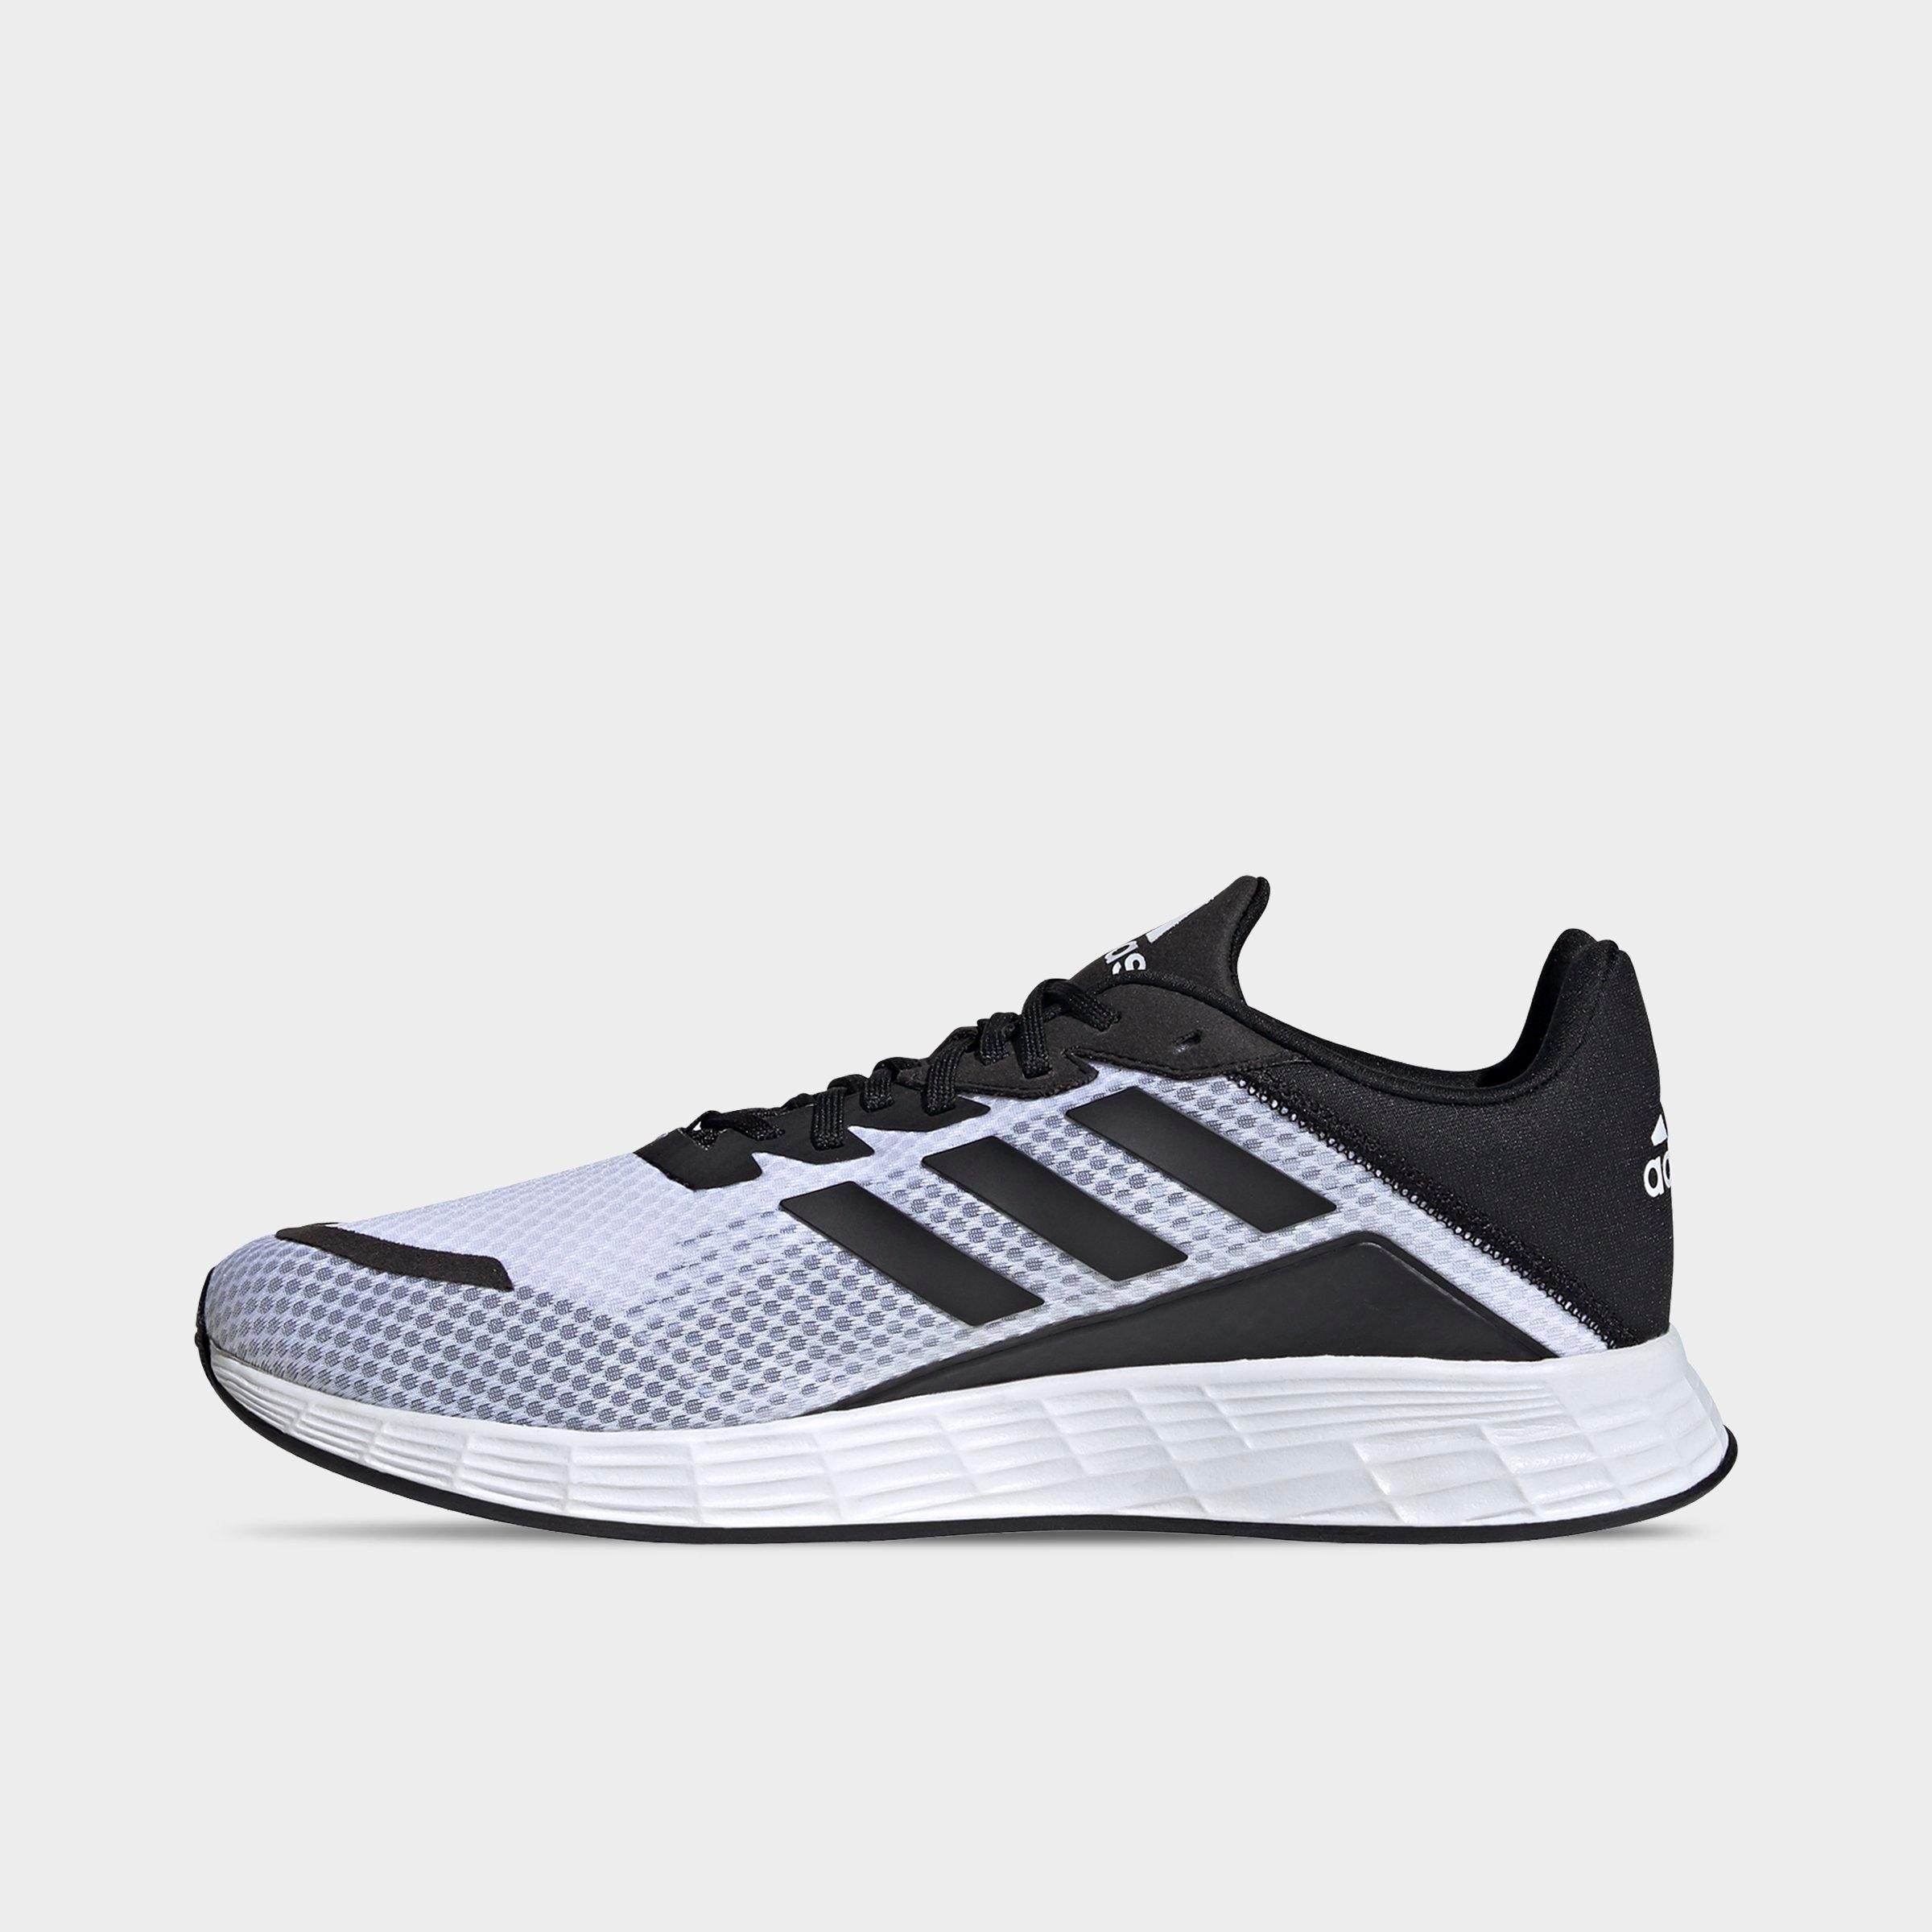 adidas wide width mens shoes